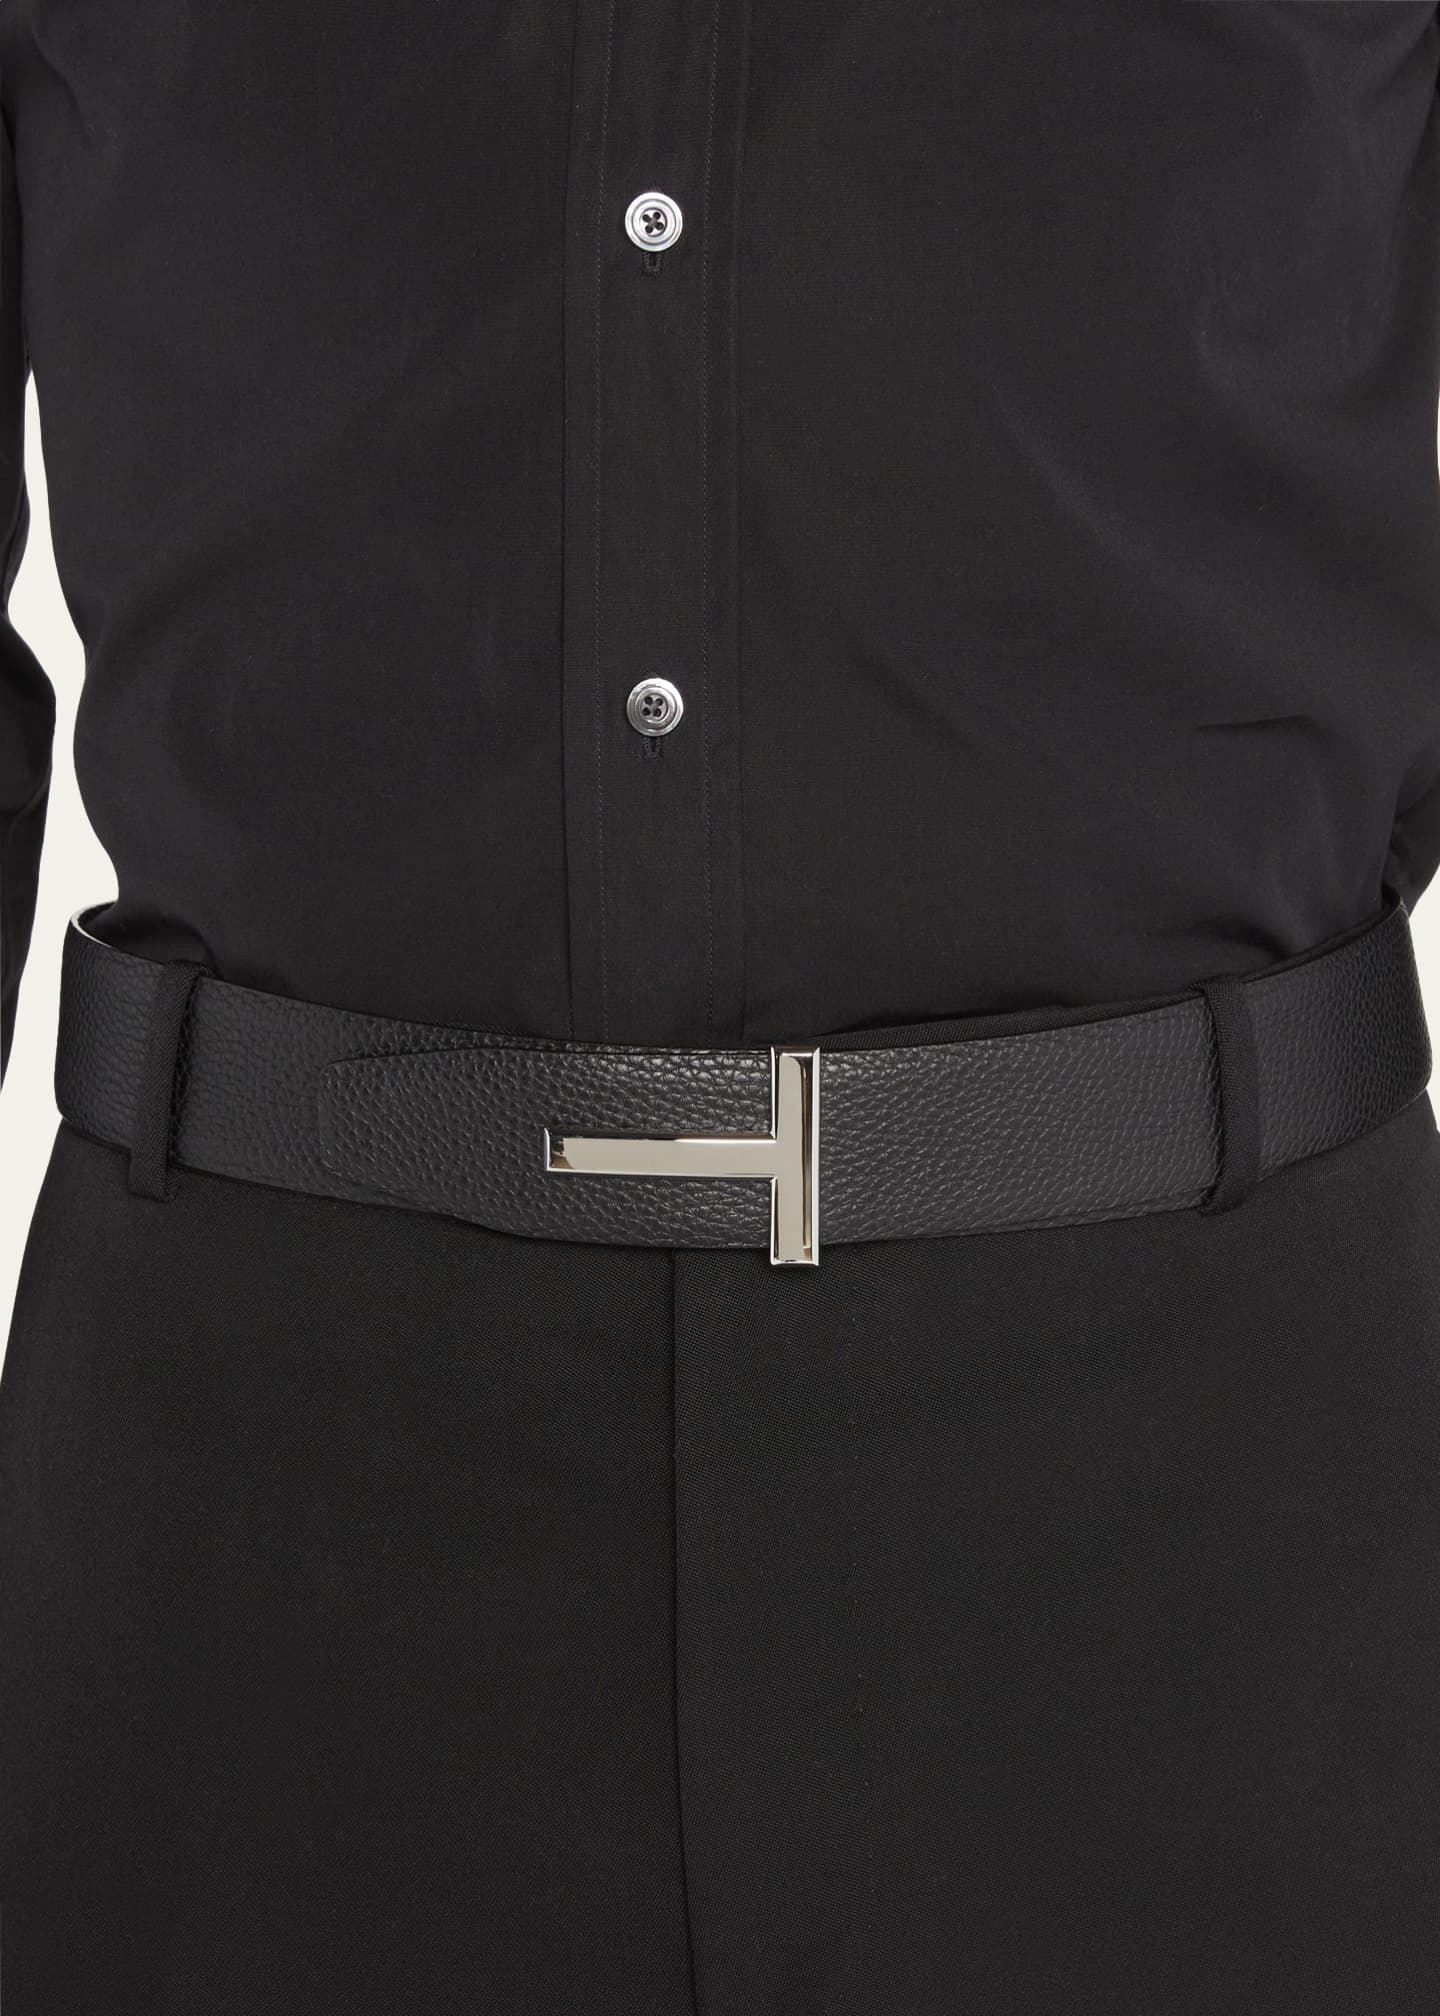 TOM FORD reversible leather belt - Brown